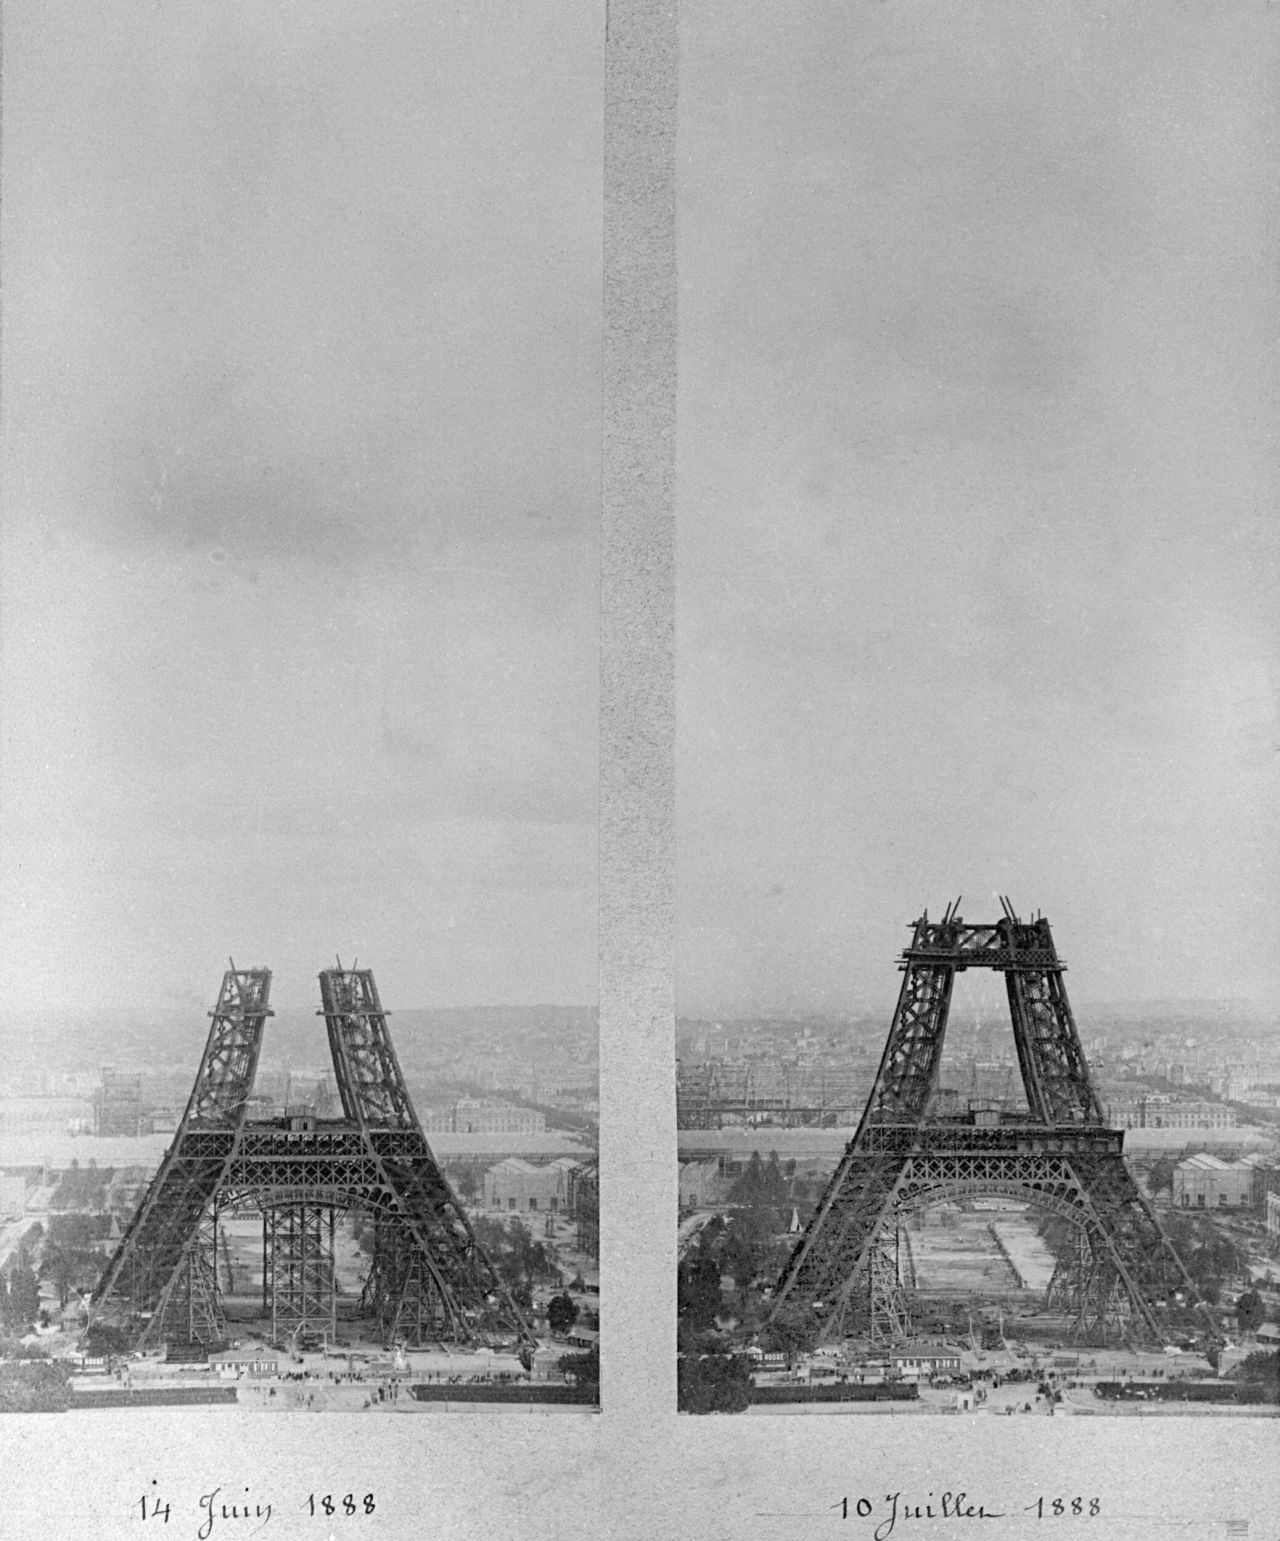 The tower rises up. Progress is shown from June 1888 (left) to July 1888 (right). 